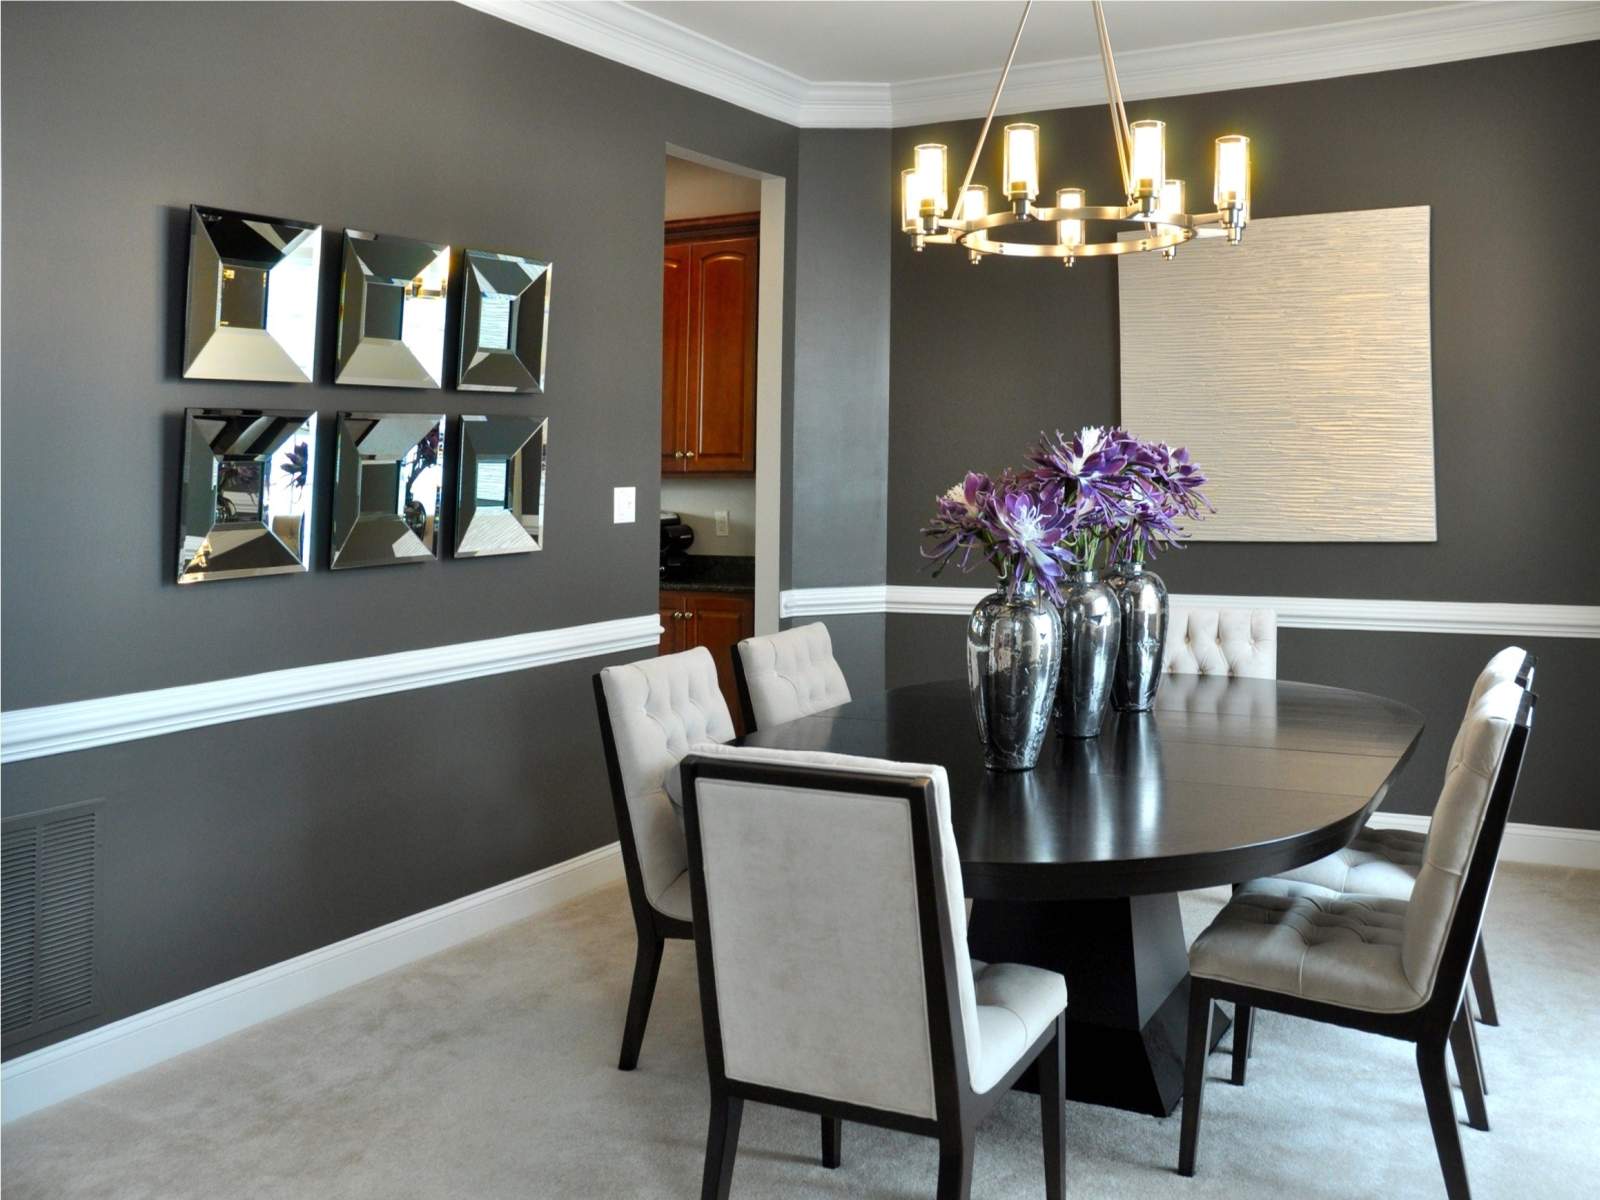 30 Amazing Gray Dining Room Ideas That Make Your Home Luxury - Interior